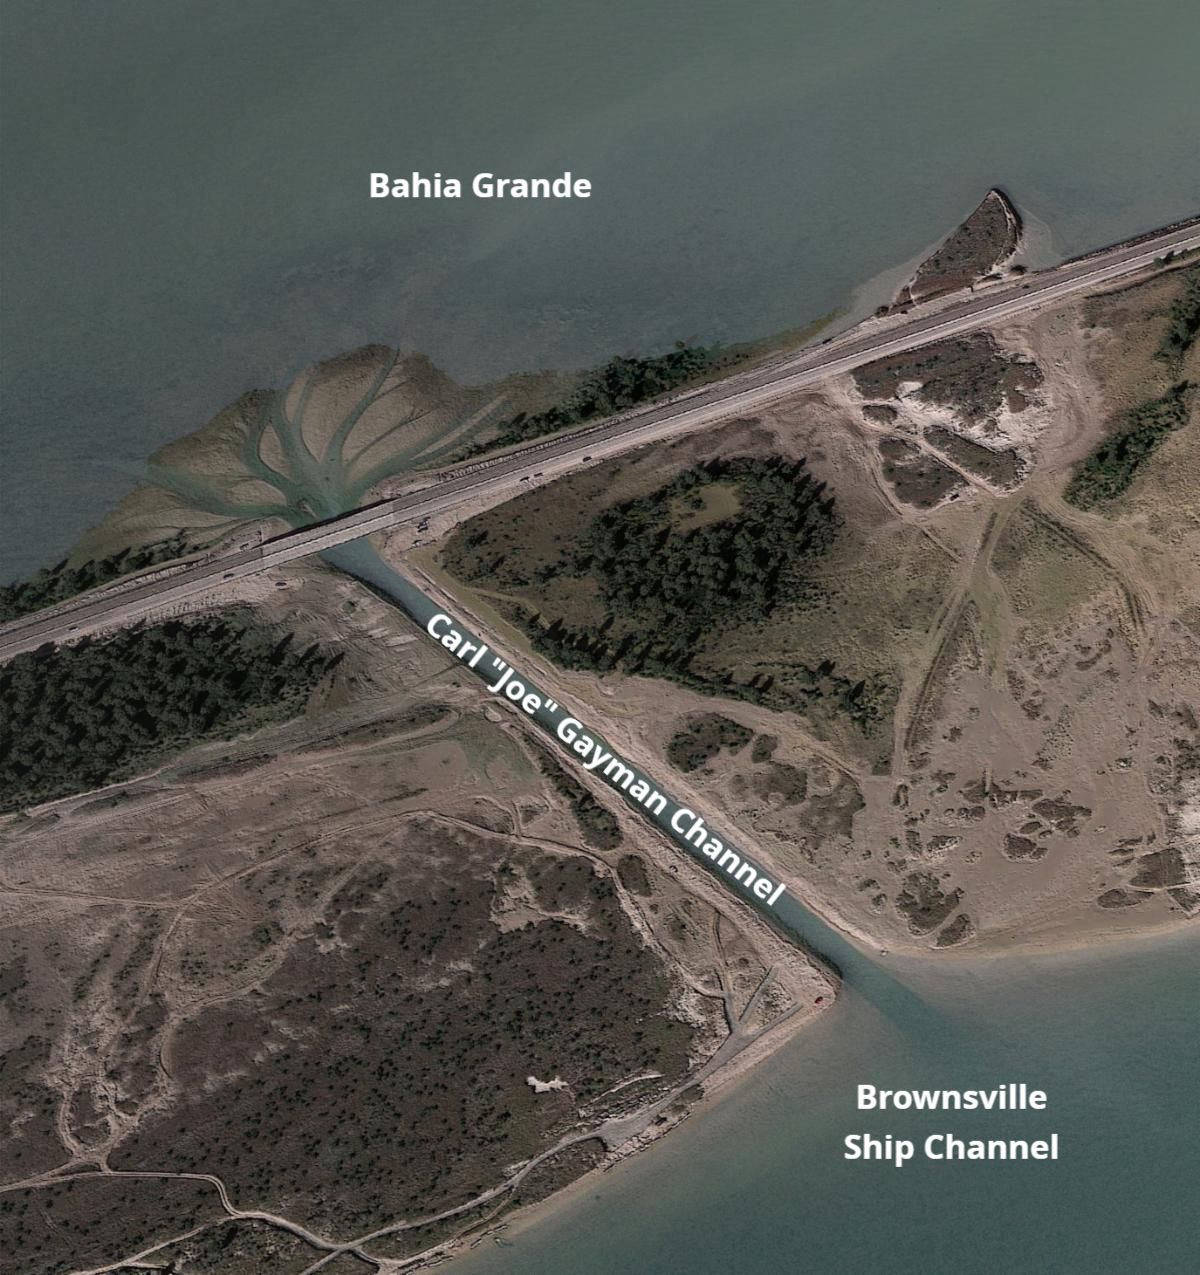 This Google Maps aerial photo shows the Carl “Joe” Gayman channel connecting the Bahia Grande with the Brownsville Ship Channel. This channel will be widened from its existing 34-foot width to 250 feet, providing much more natural tidal exchange and ecological growth in the Bahia Grande.